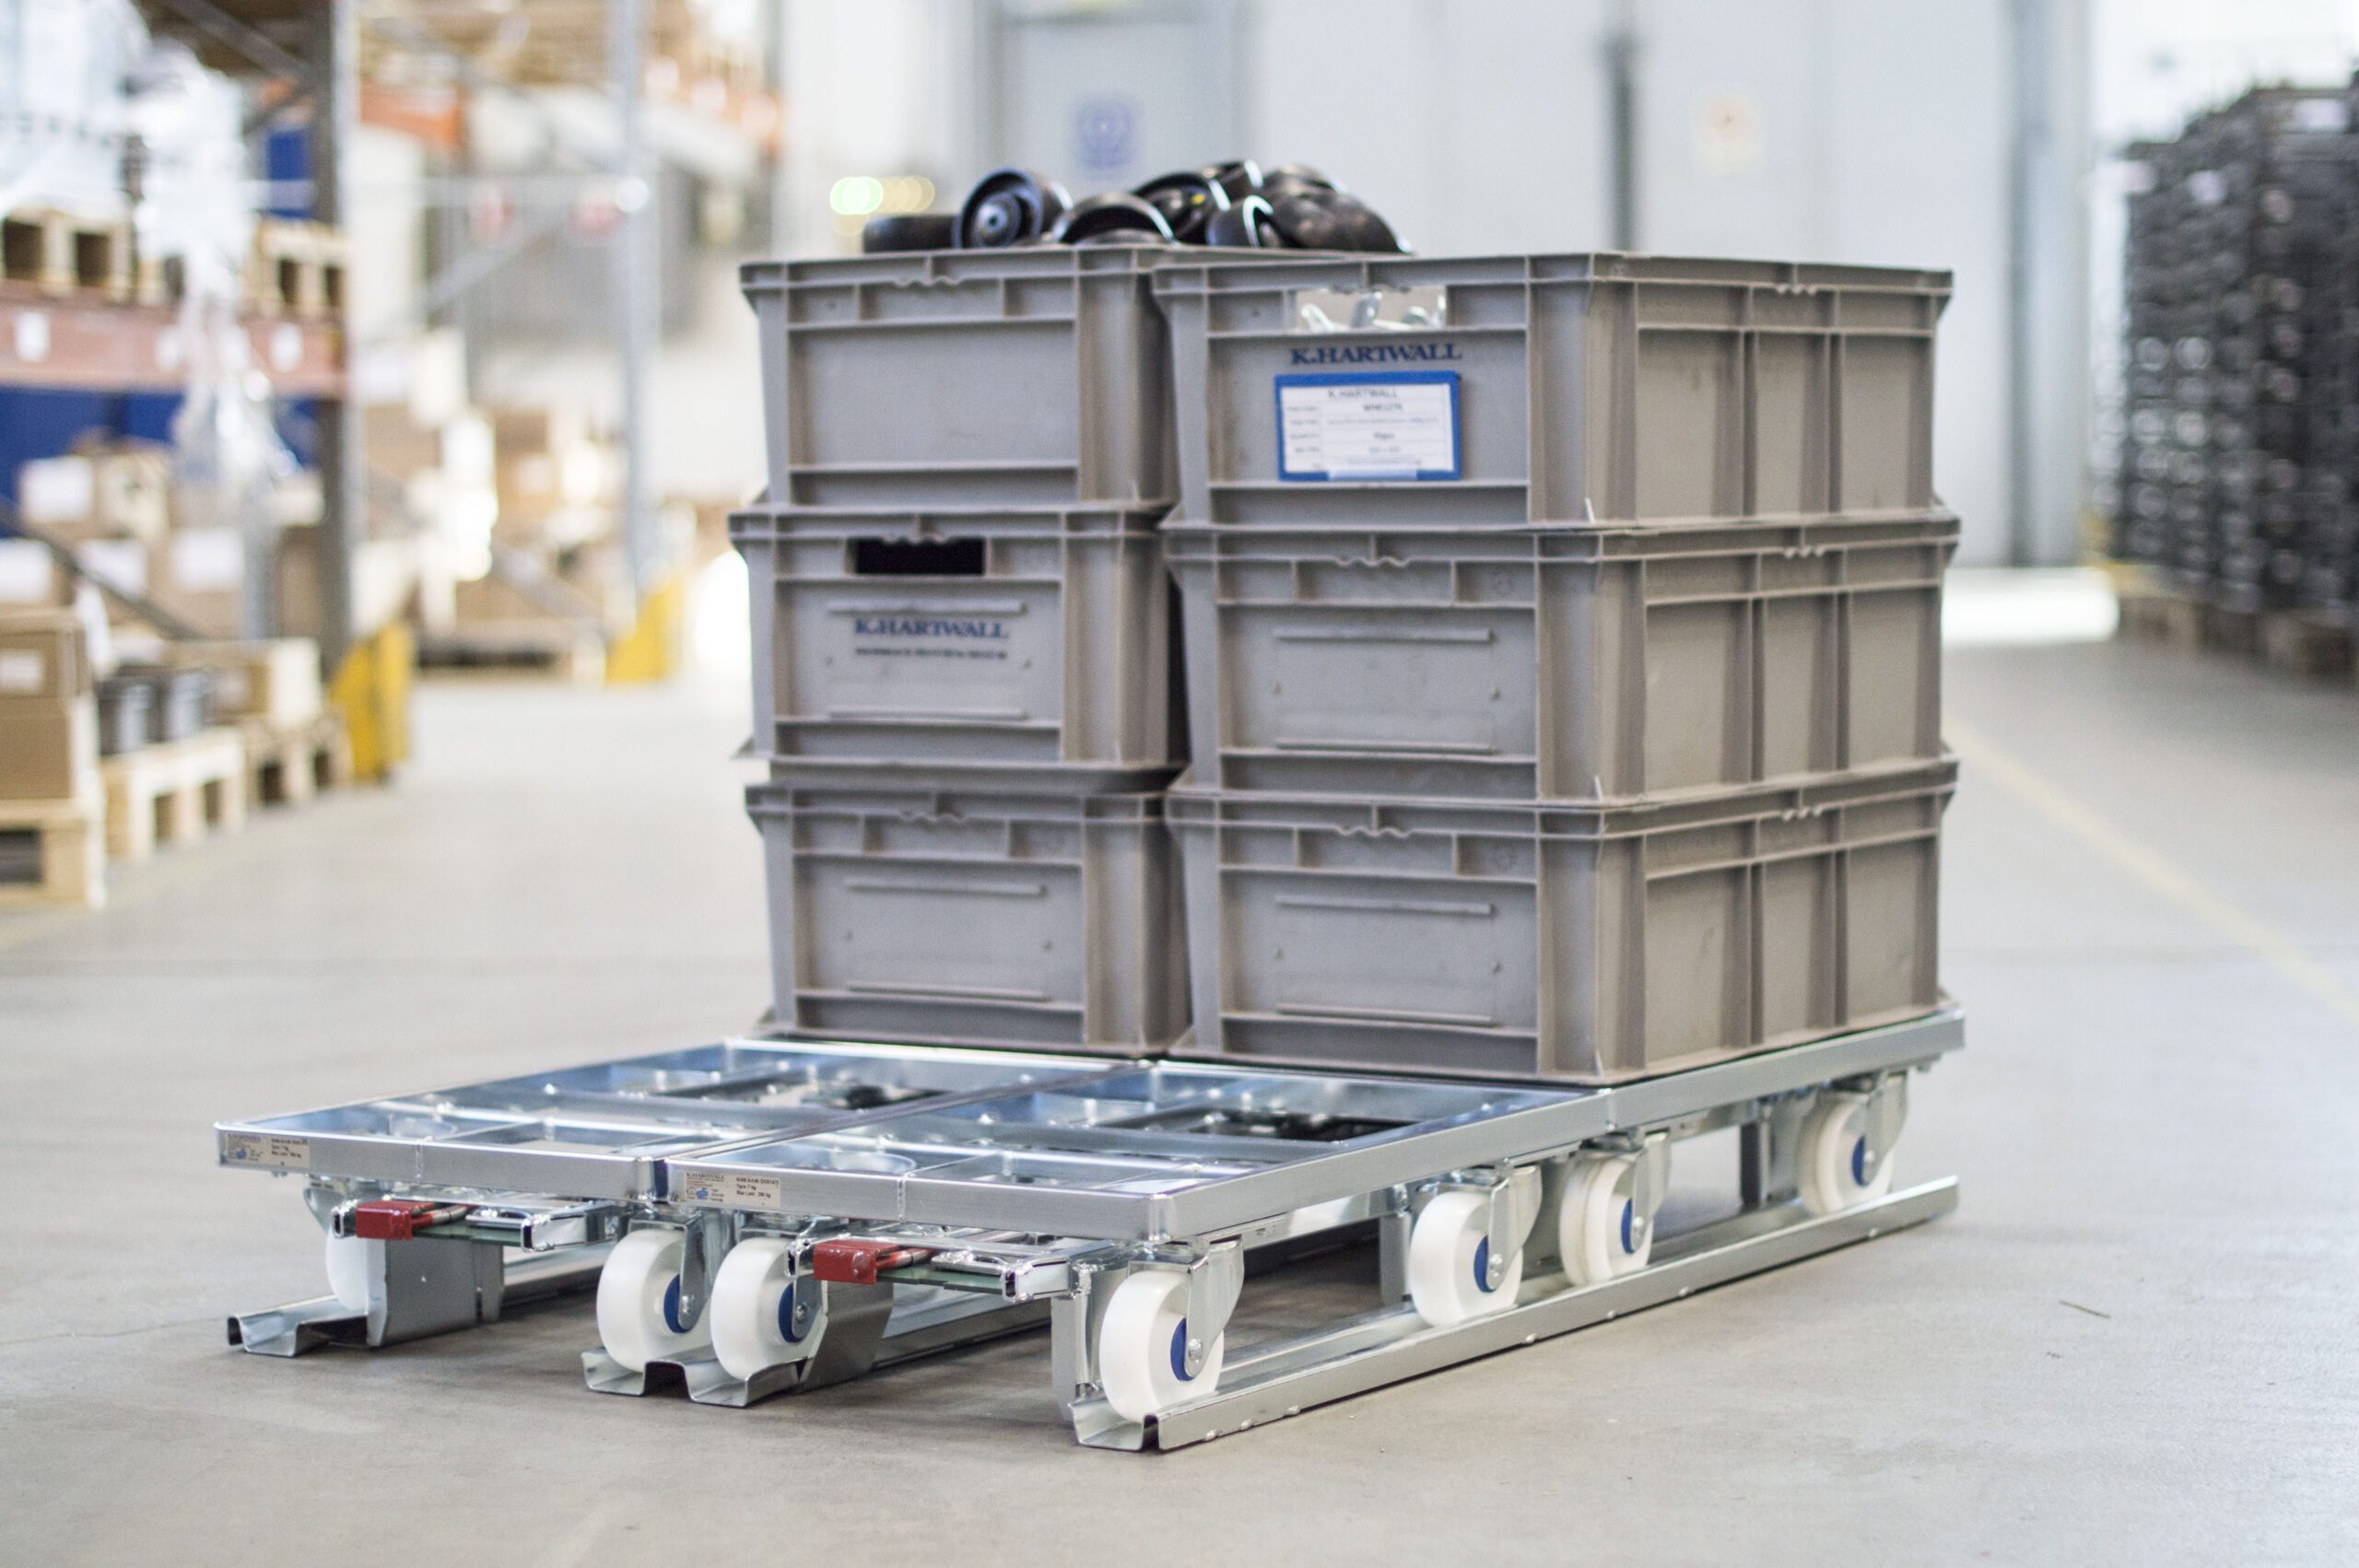 Lean Logistics: transport systems in the automotive industry with load carrier from K. Hartwall